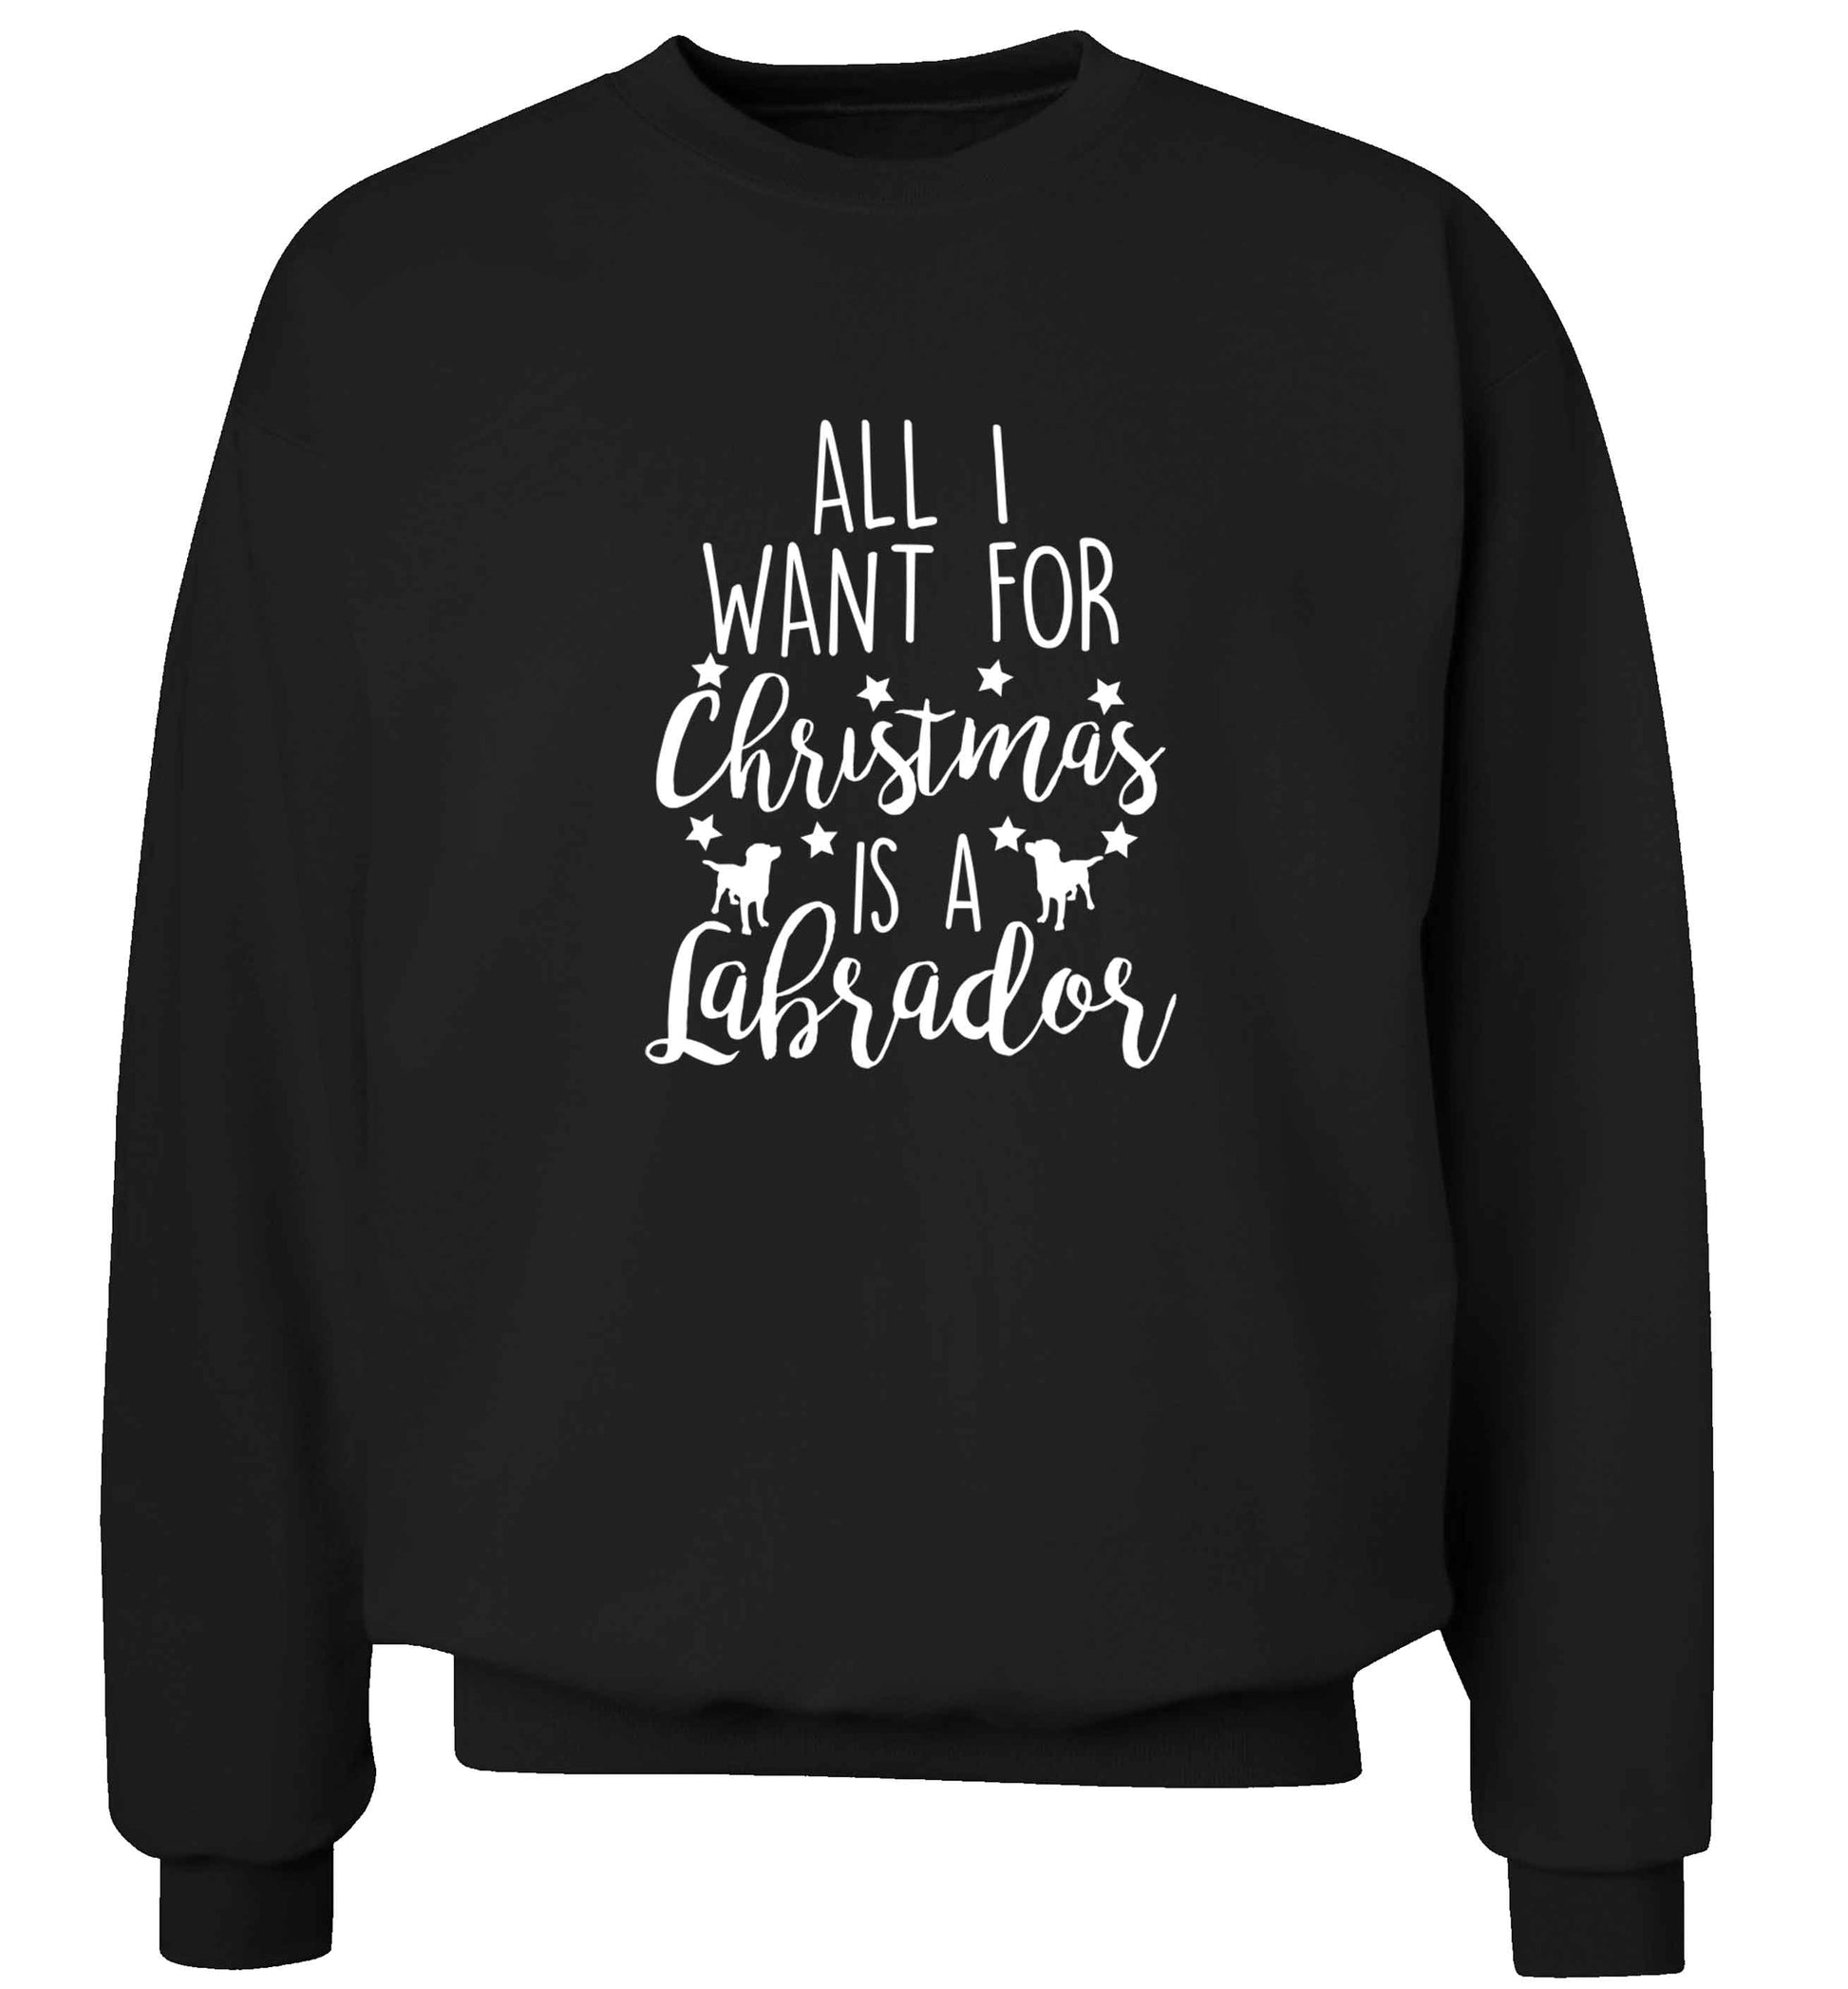 All I want for Christmas is a labrador adult's unisex black sweater 2XL